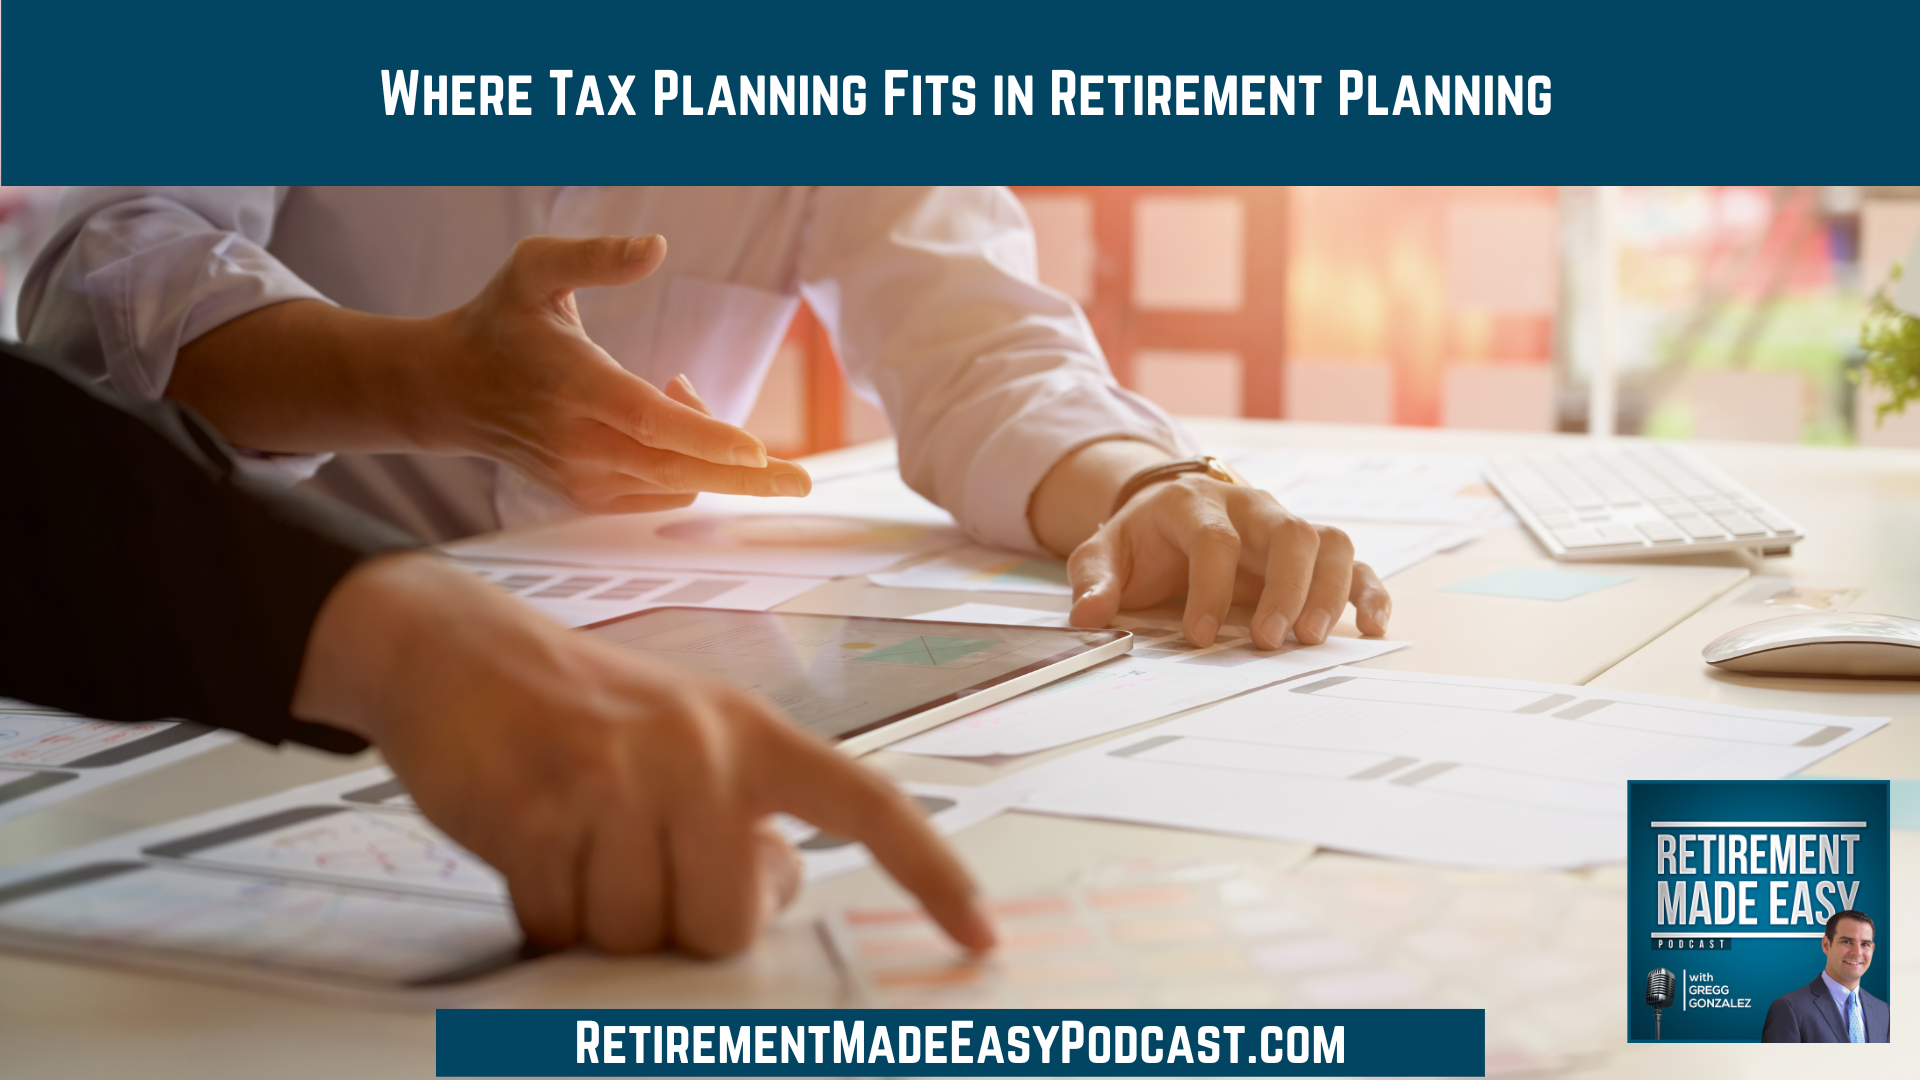 Where Tax Planning Fits in Retirement Planning